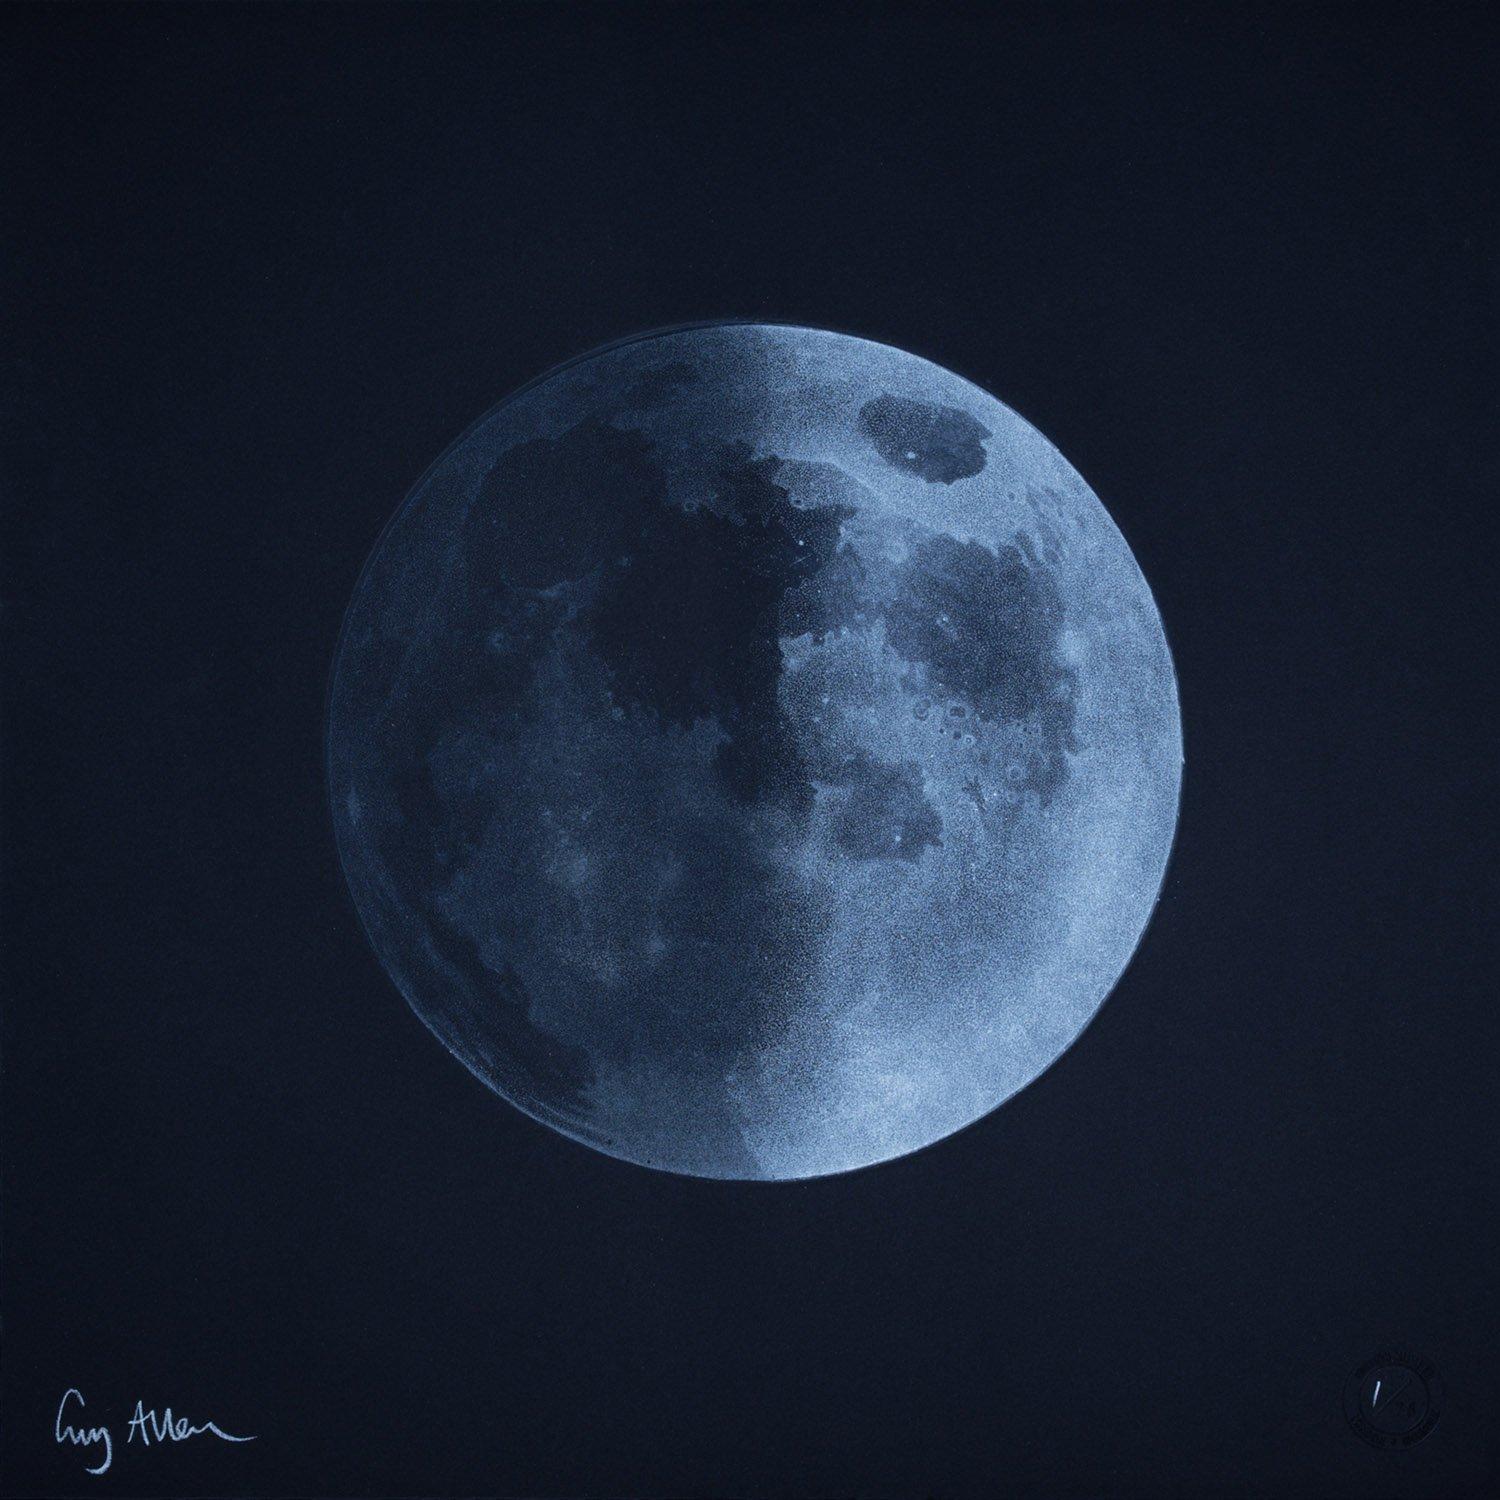 Waxing Quarter Moon by Guy Allen.  Print from acid etching.  Unframed